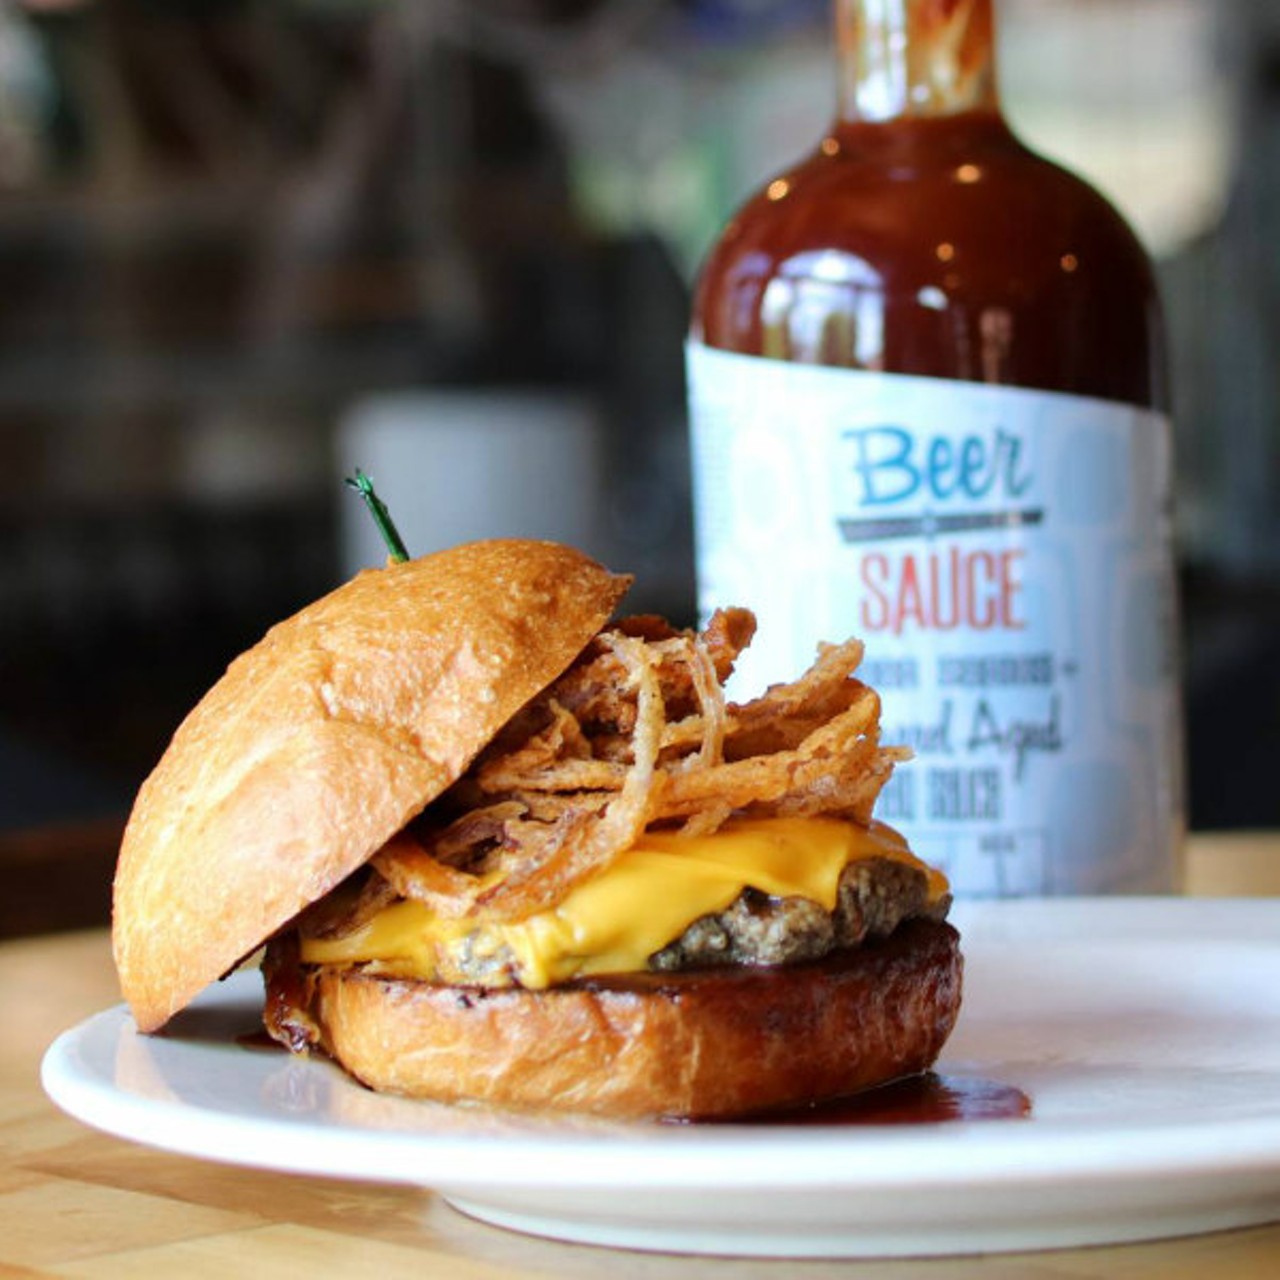 The Schlafly Tap Room
(2100 Locust Street, 314-241-2337)
5 oz. beef patty burger on brioche bun, topped with Beer Sauce Shop's Schlafly barrel-aged BBQ sauce, American cheese and fried onions.